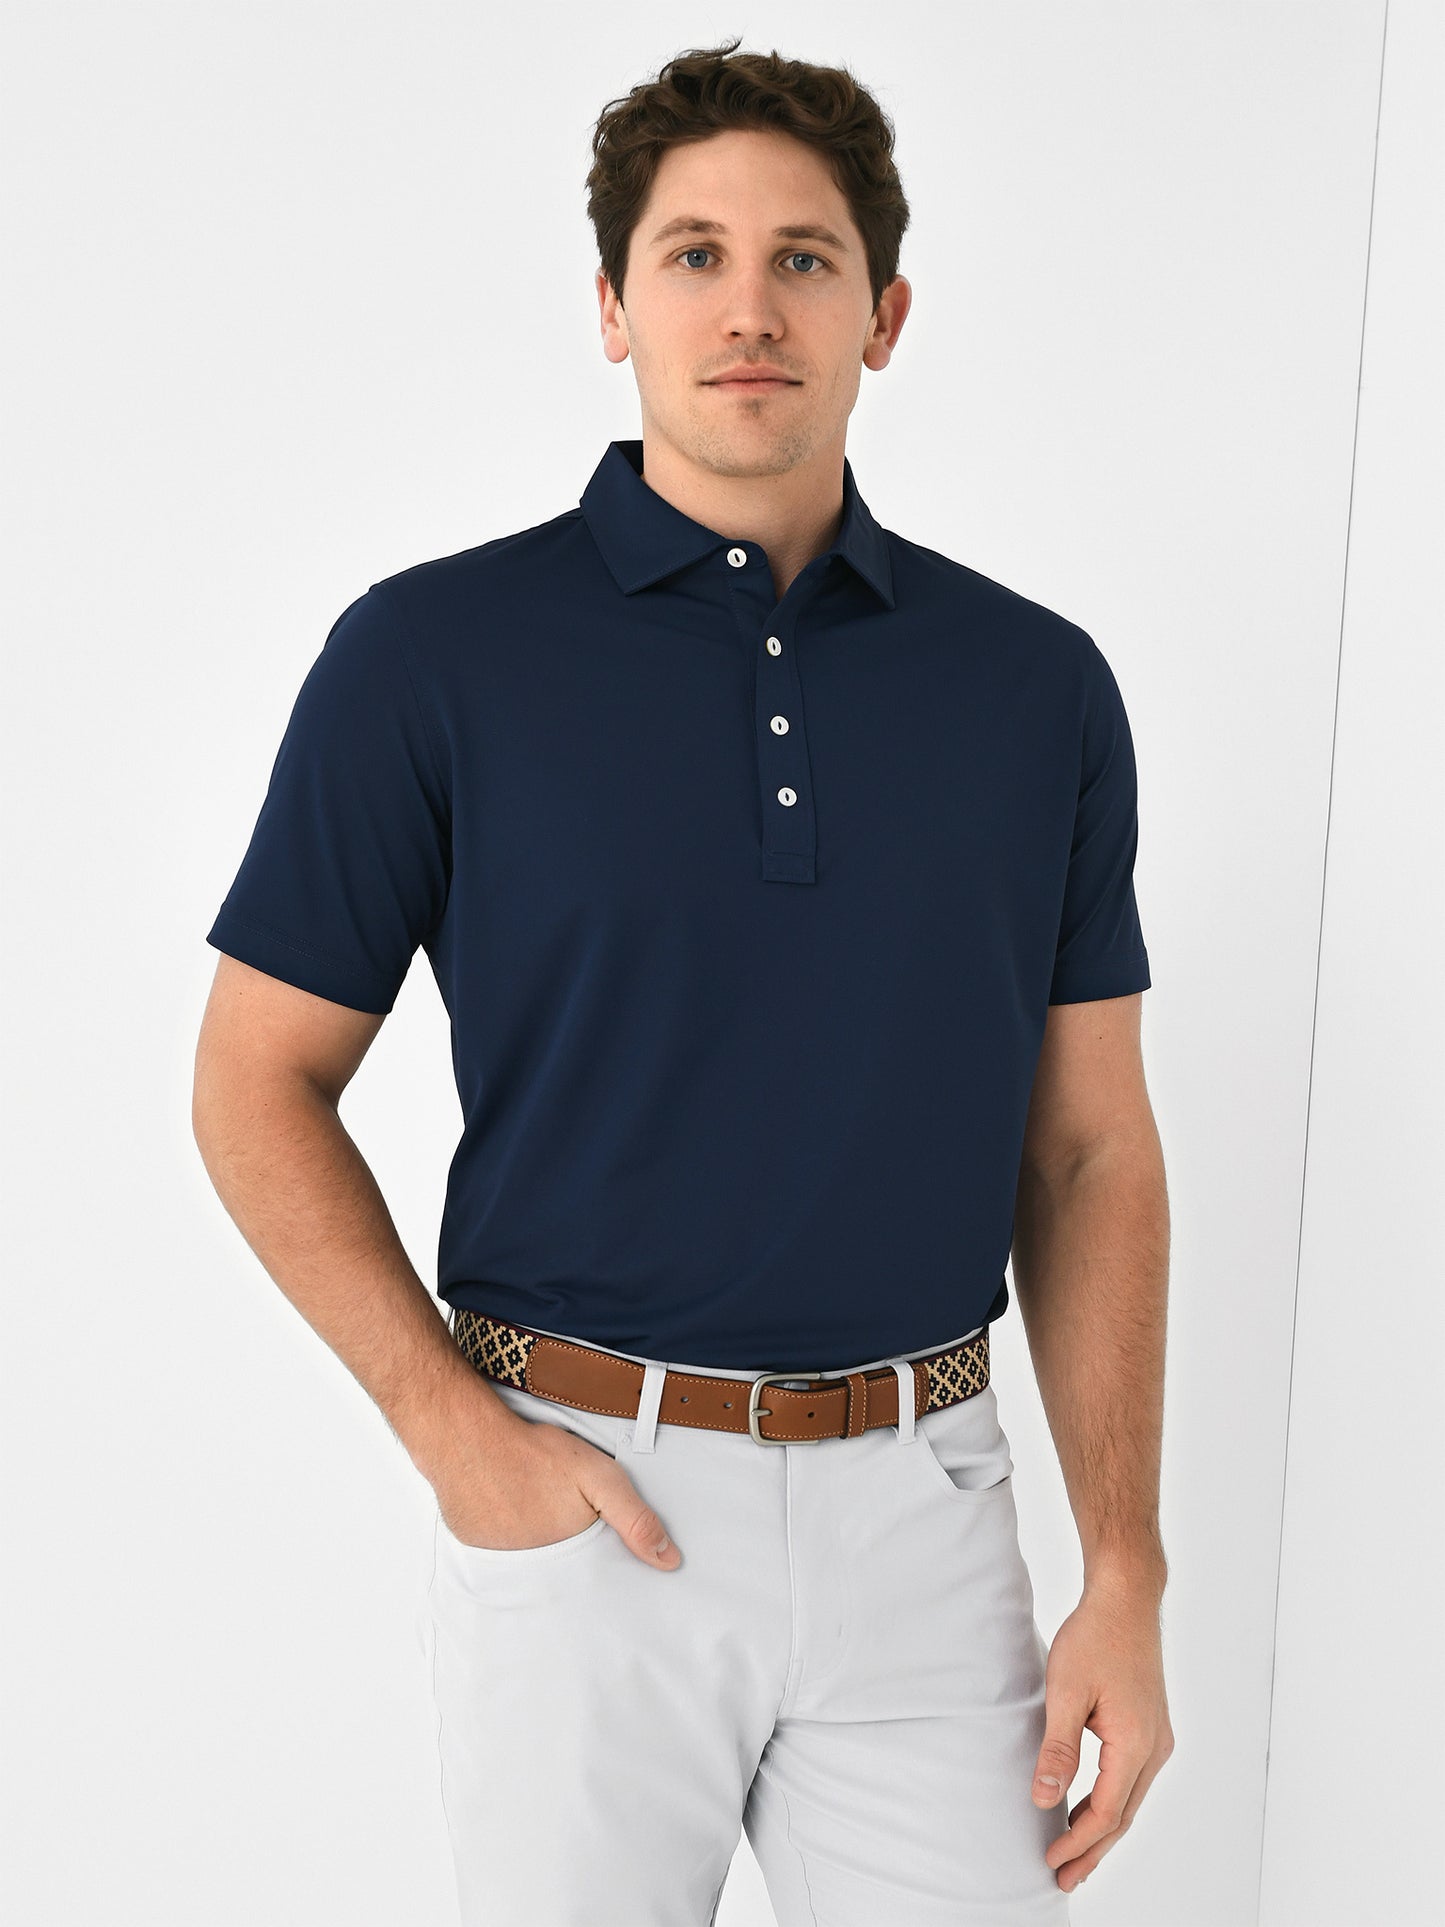 Peter Millar Crown Crafted Men's Soul Performance Mesh Polo